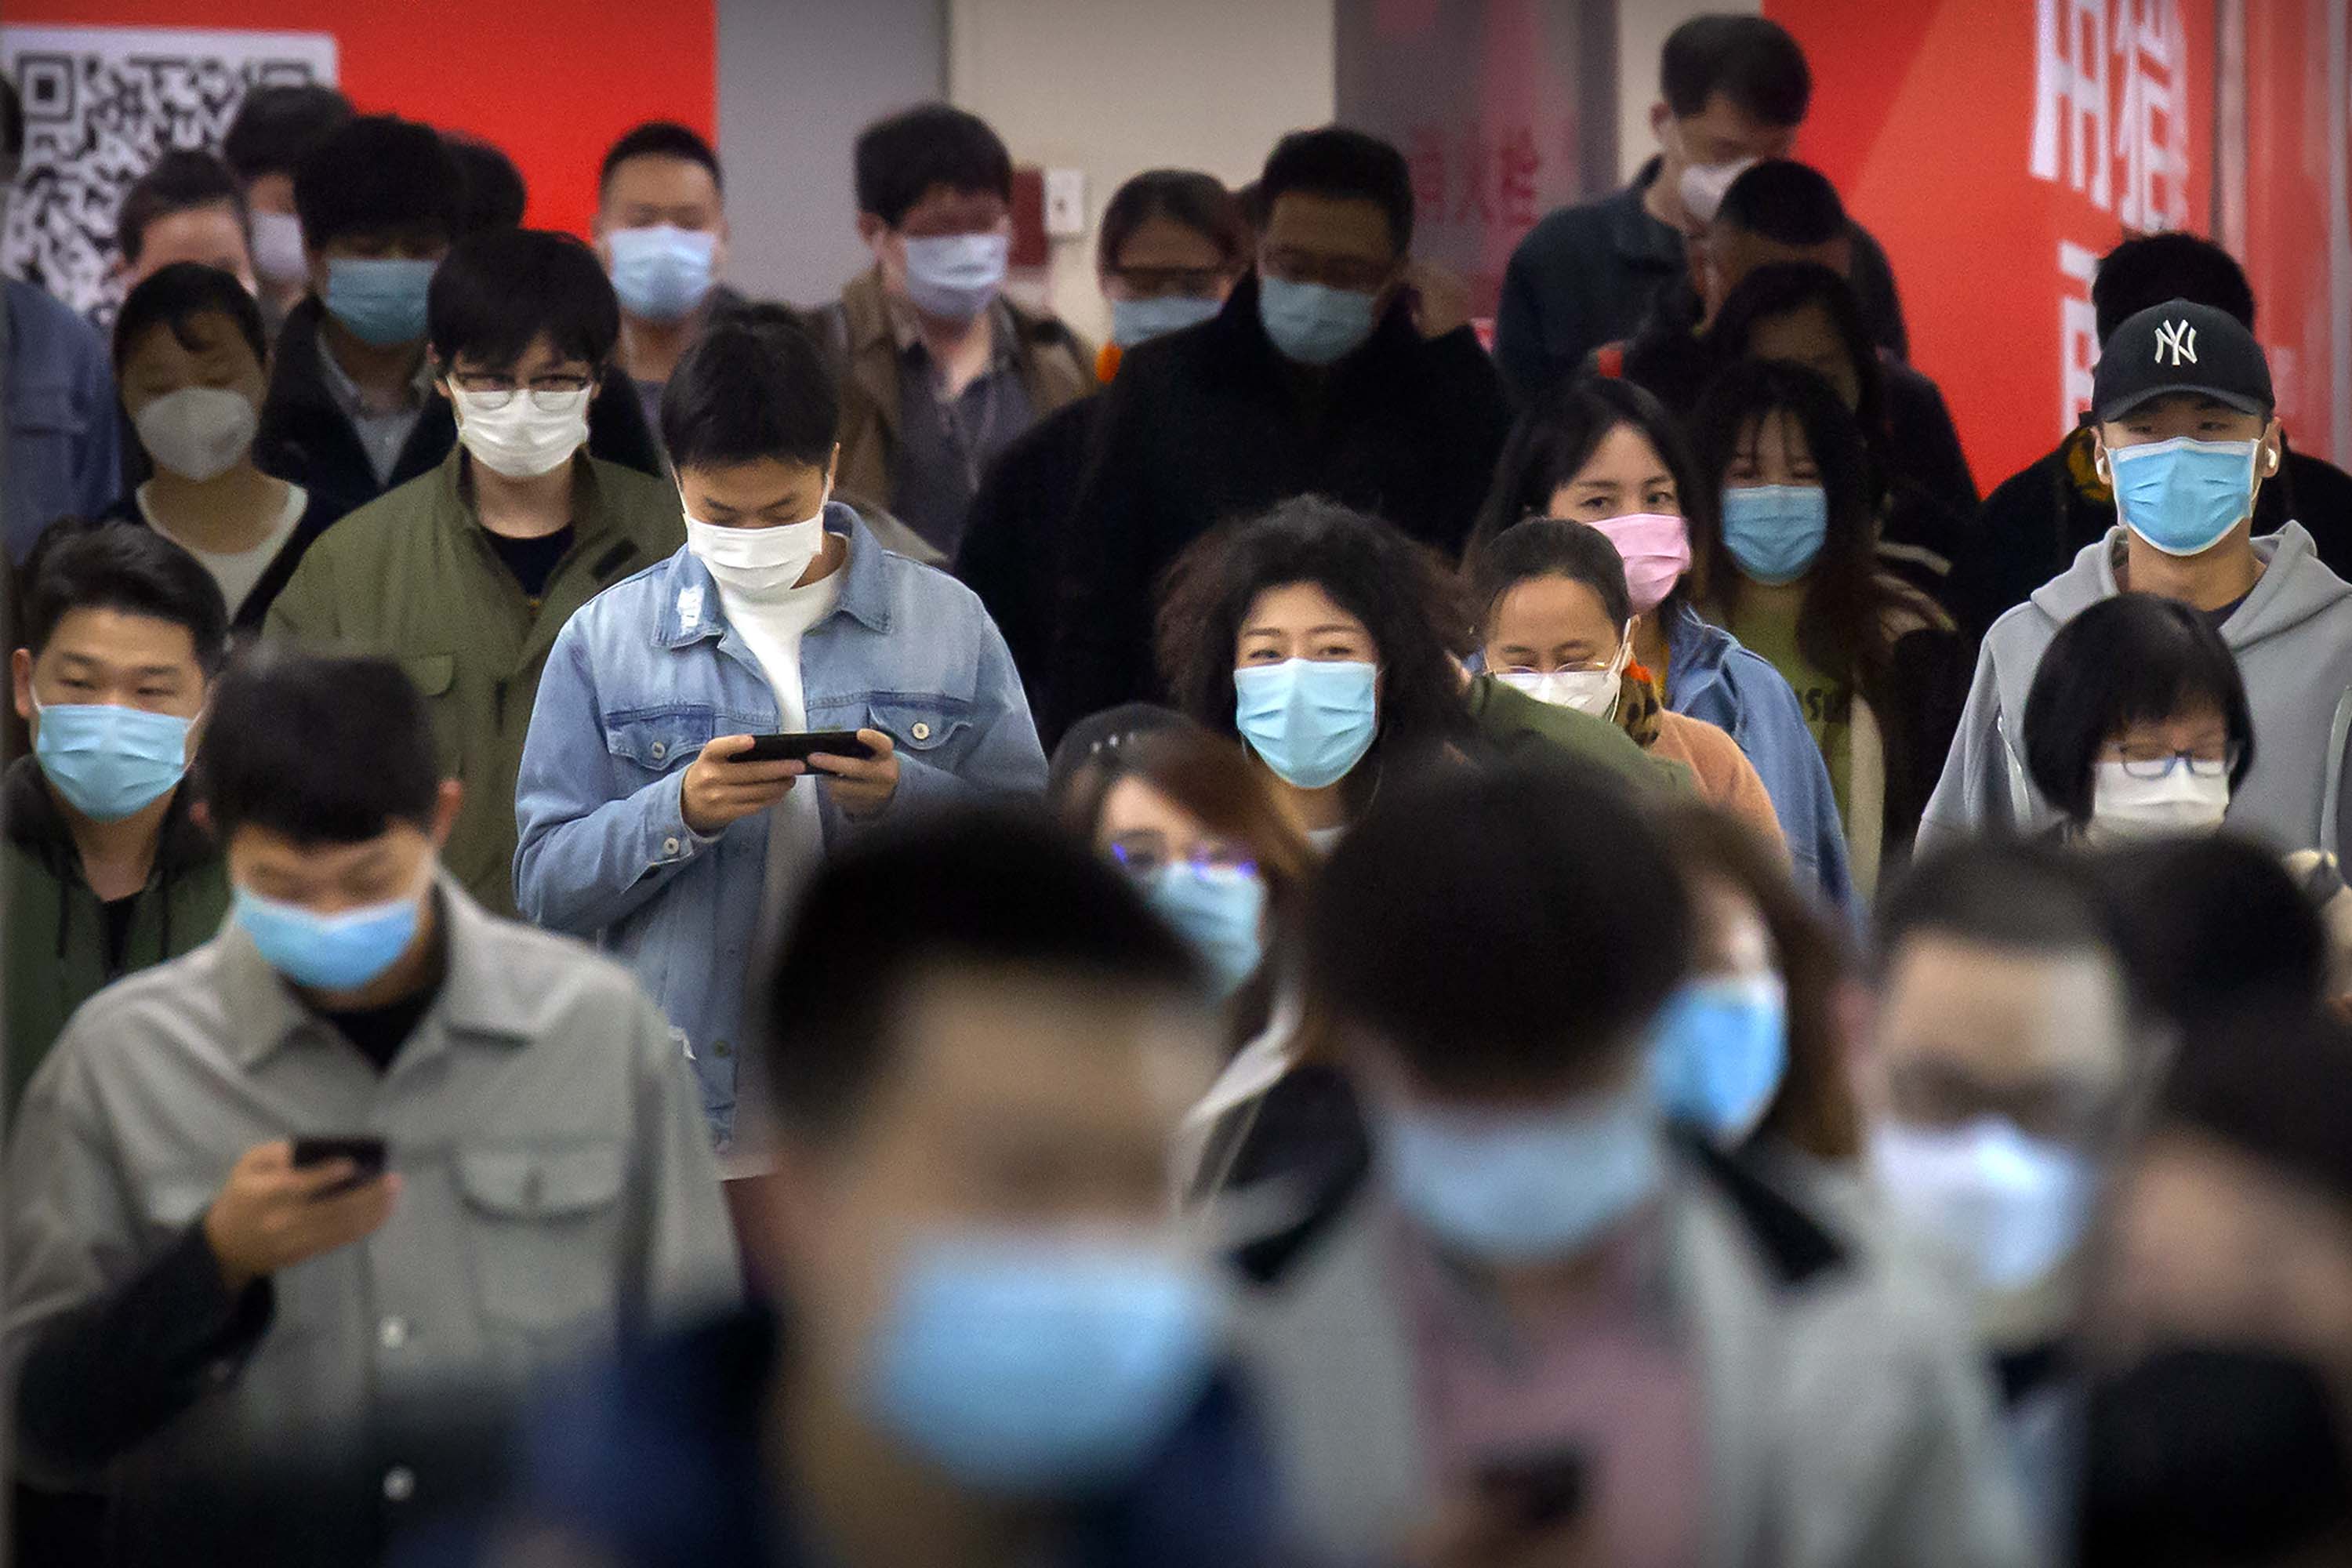 Commuters make their way through a subway station in Beijing, China on April 9.